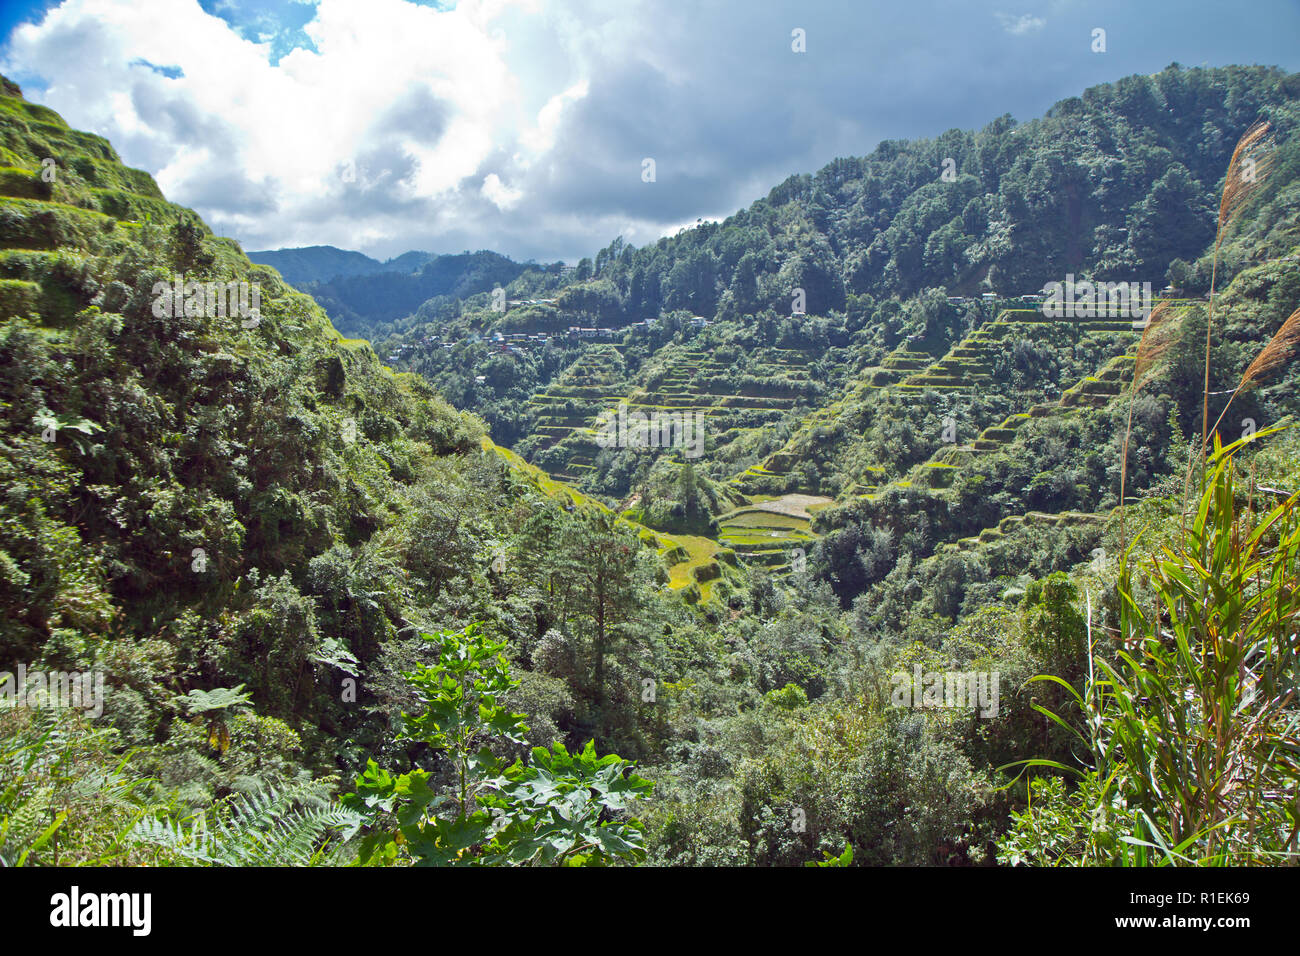 The Banaue Rice Terraces are carved into the mountains of Ifugao in the Philippines by the ancestors of the indigenous people. Stock Photo